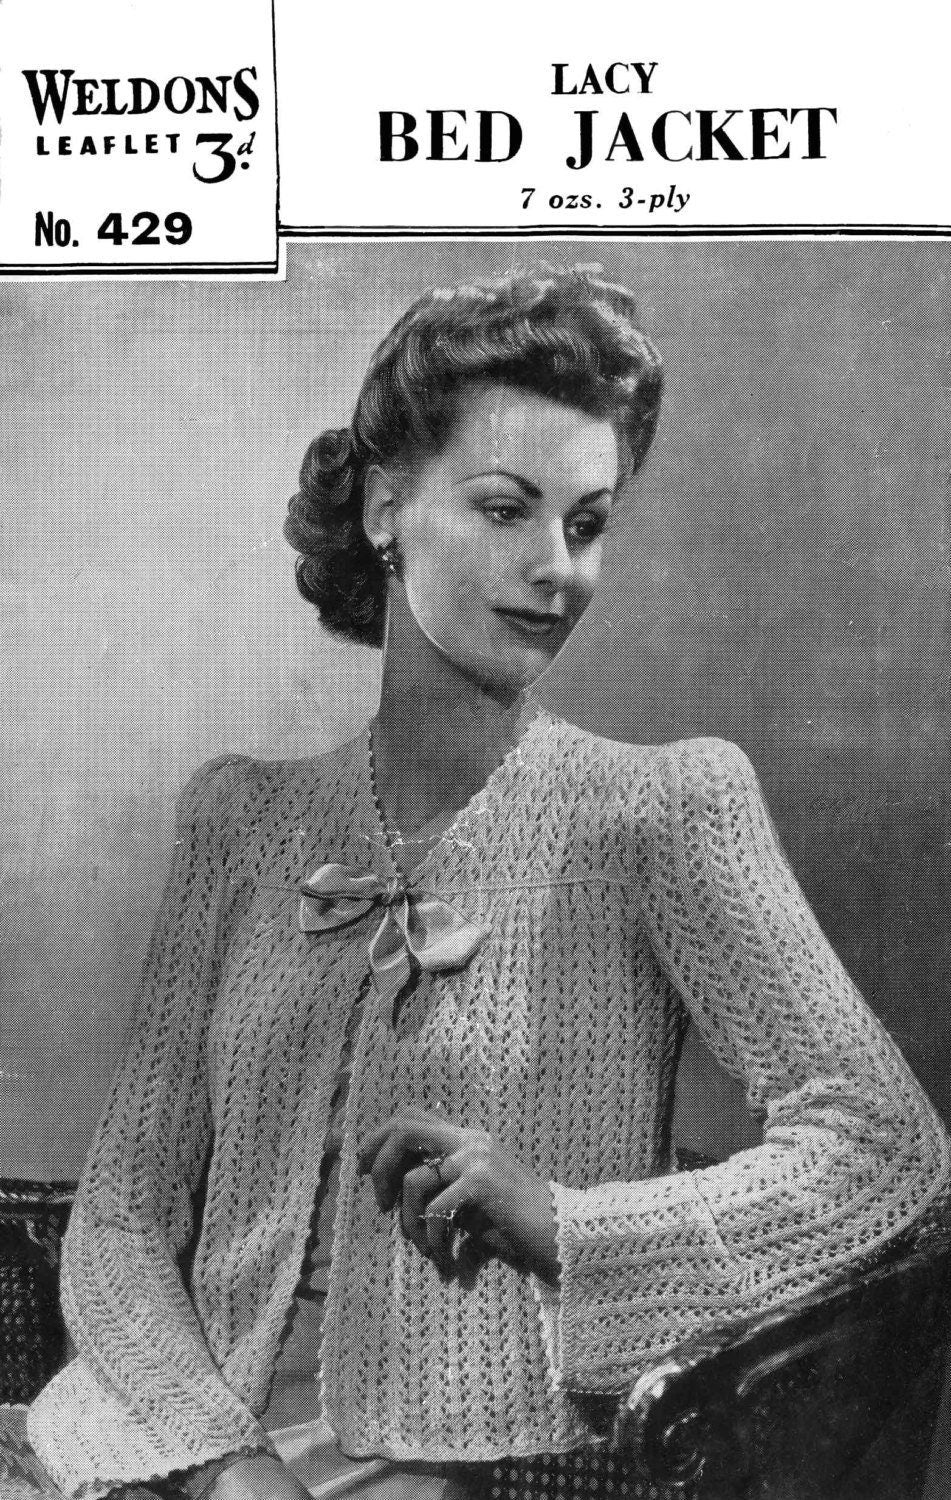 Ladies Lacy Bed Jacket, 32"-36" Bust, 3ply, 40s Knitting Pattern, Weldons 429